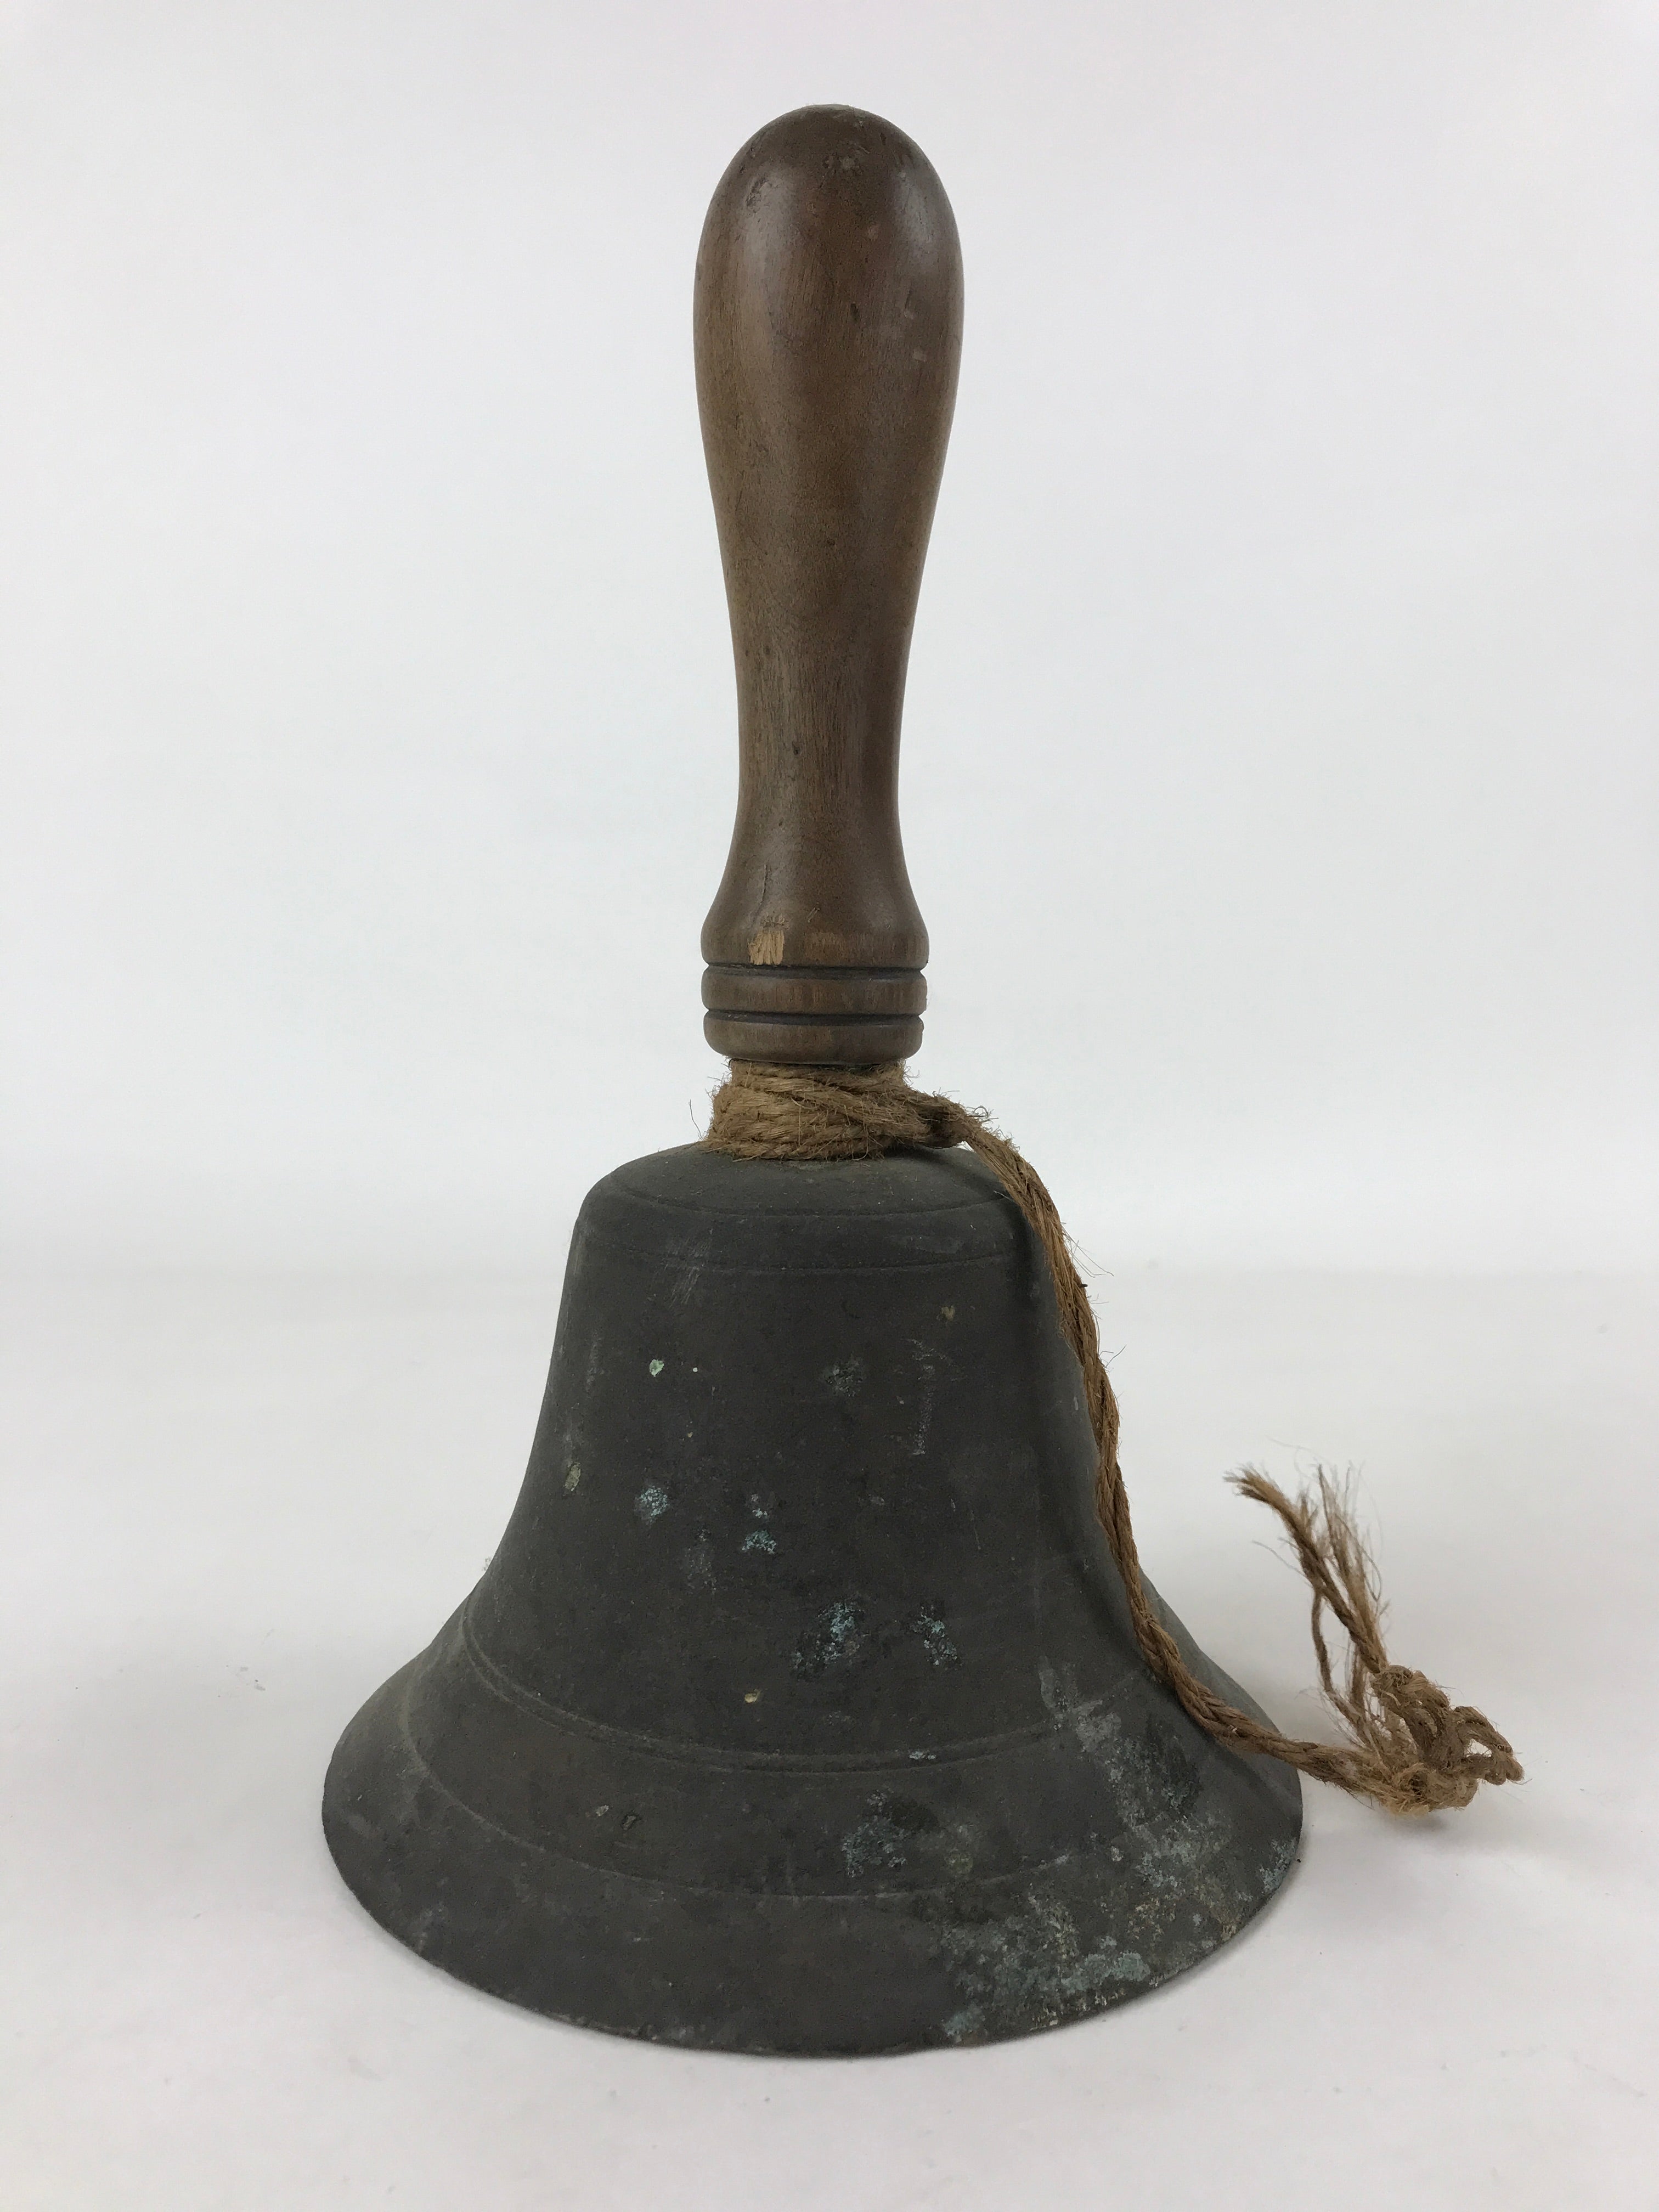 Antique Japanese Bronze Hand Bell Large Brown Wood Handle Attached String T111